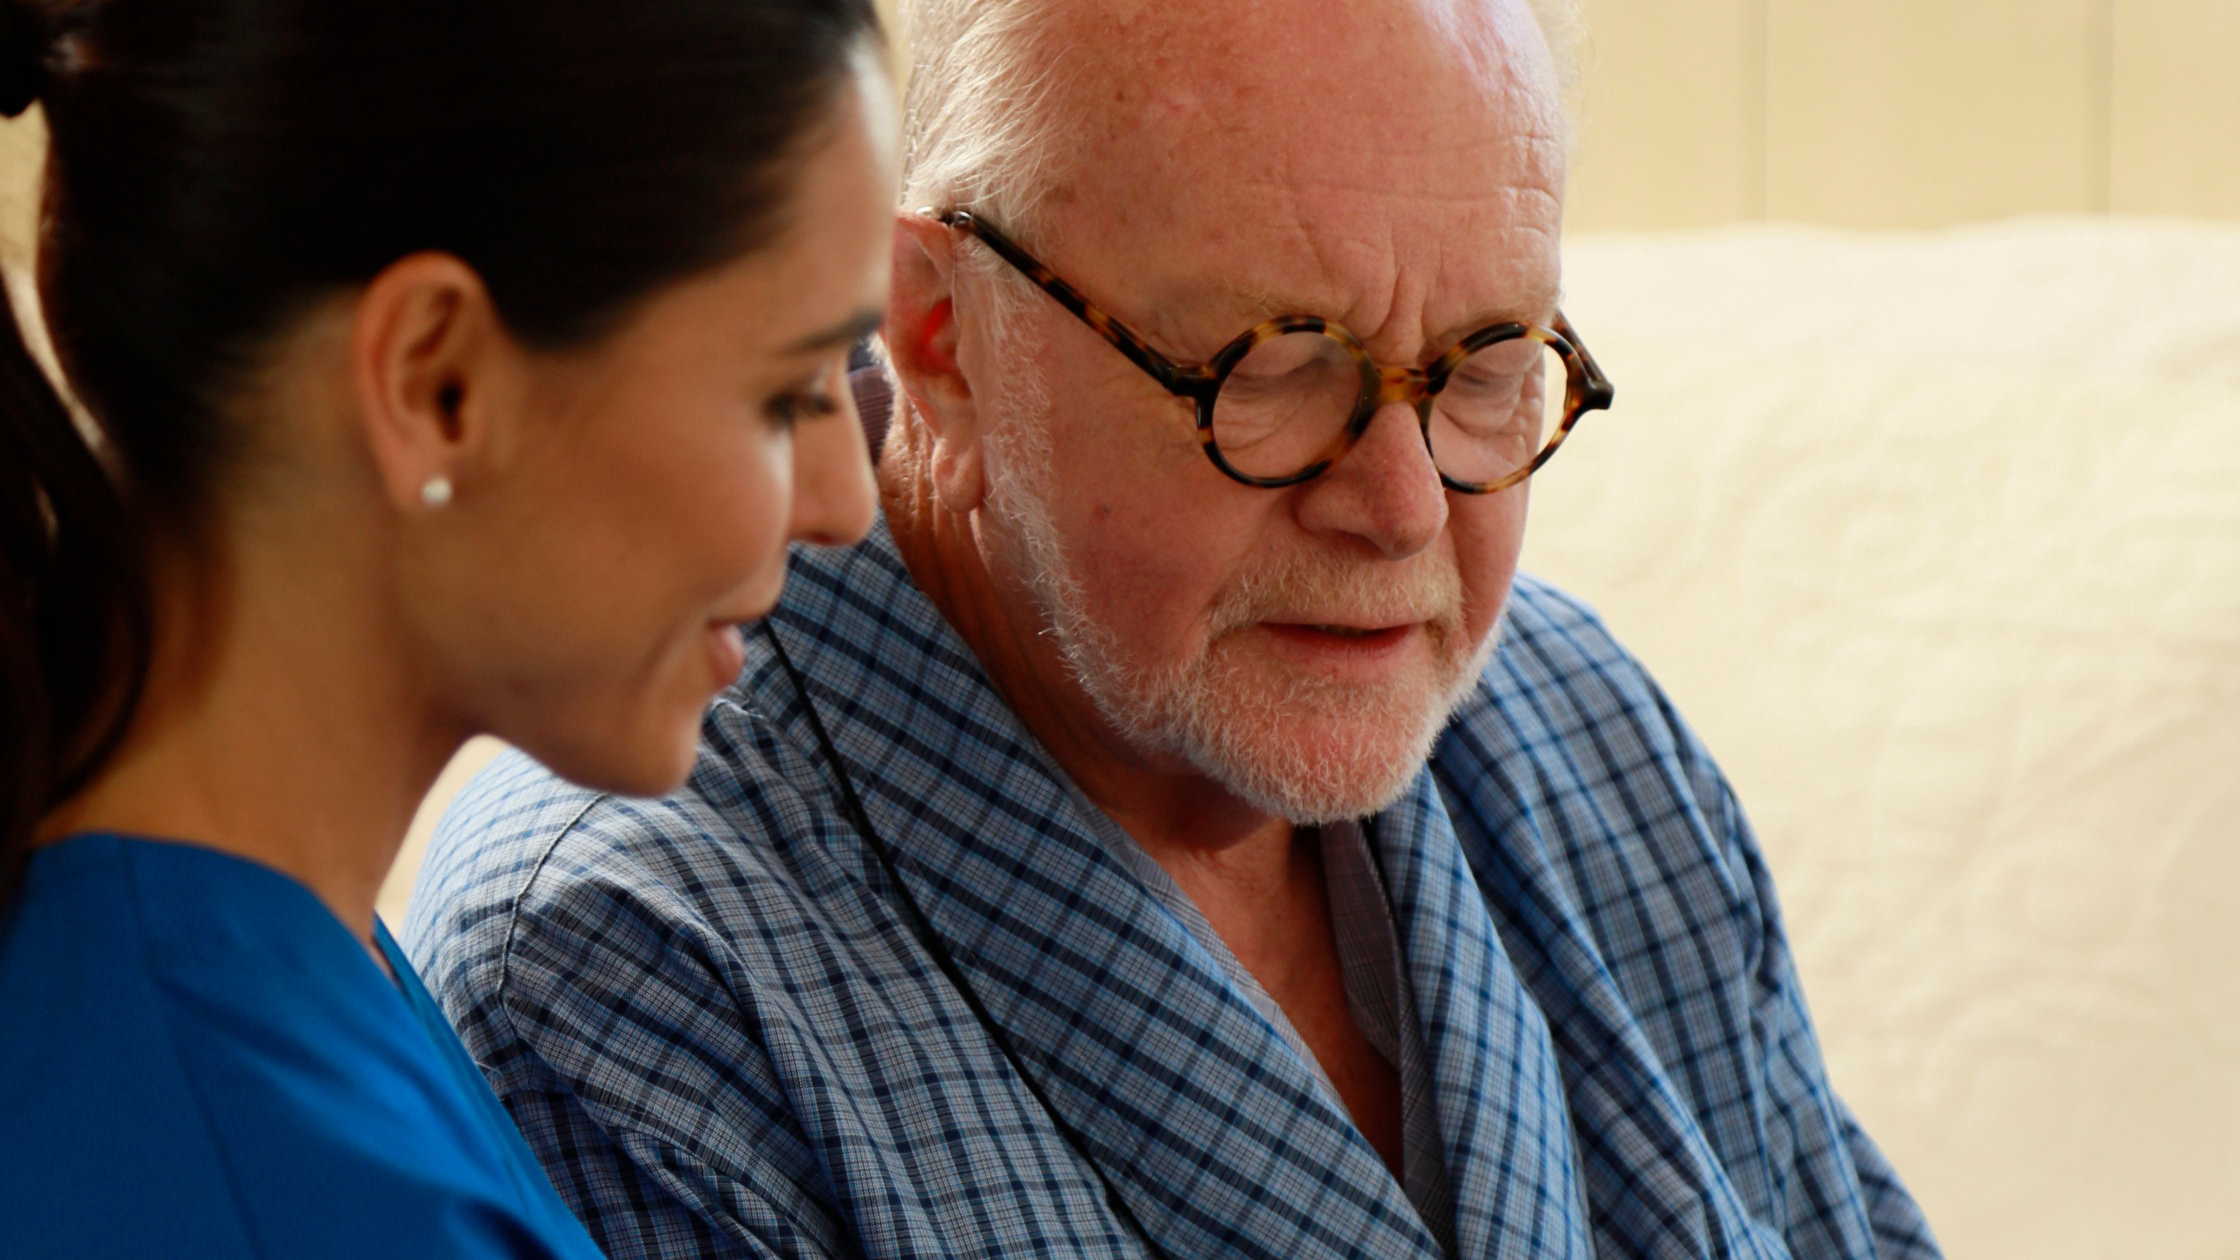 Guide To Building Trust With Dementia Patients